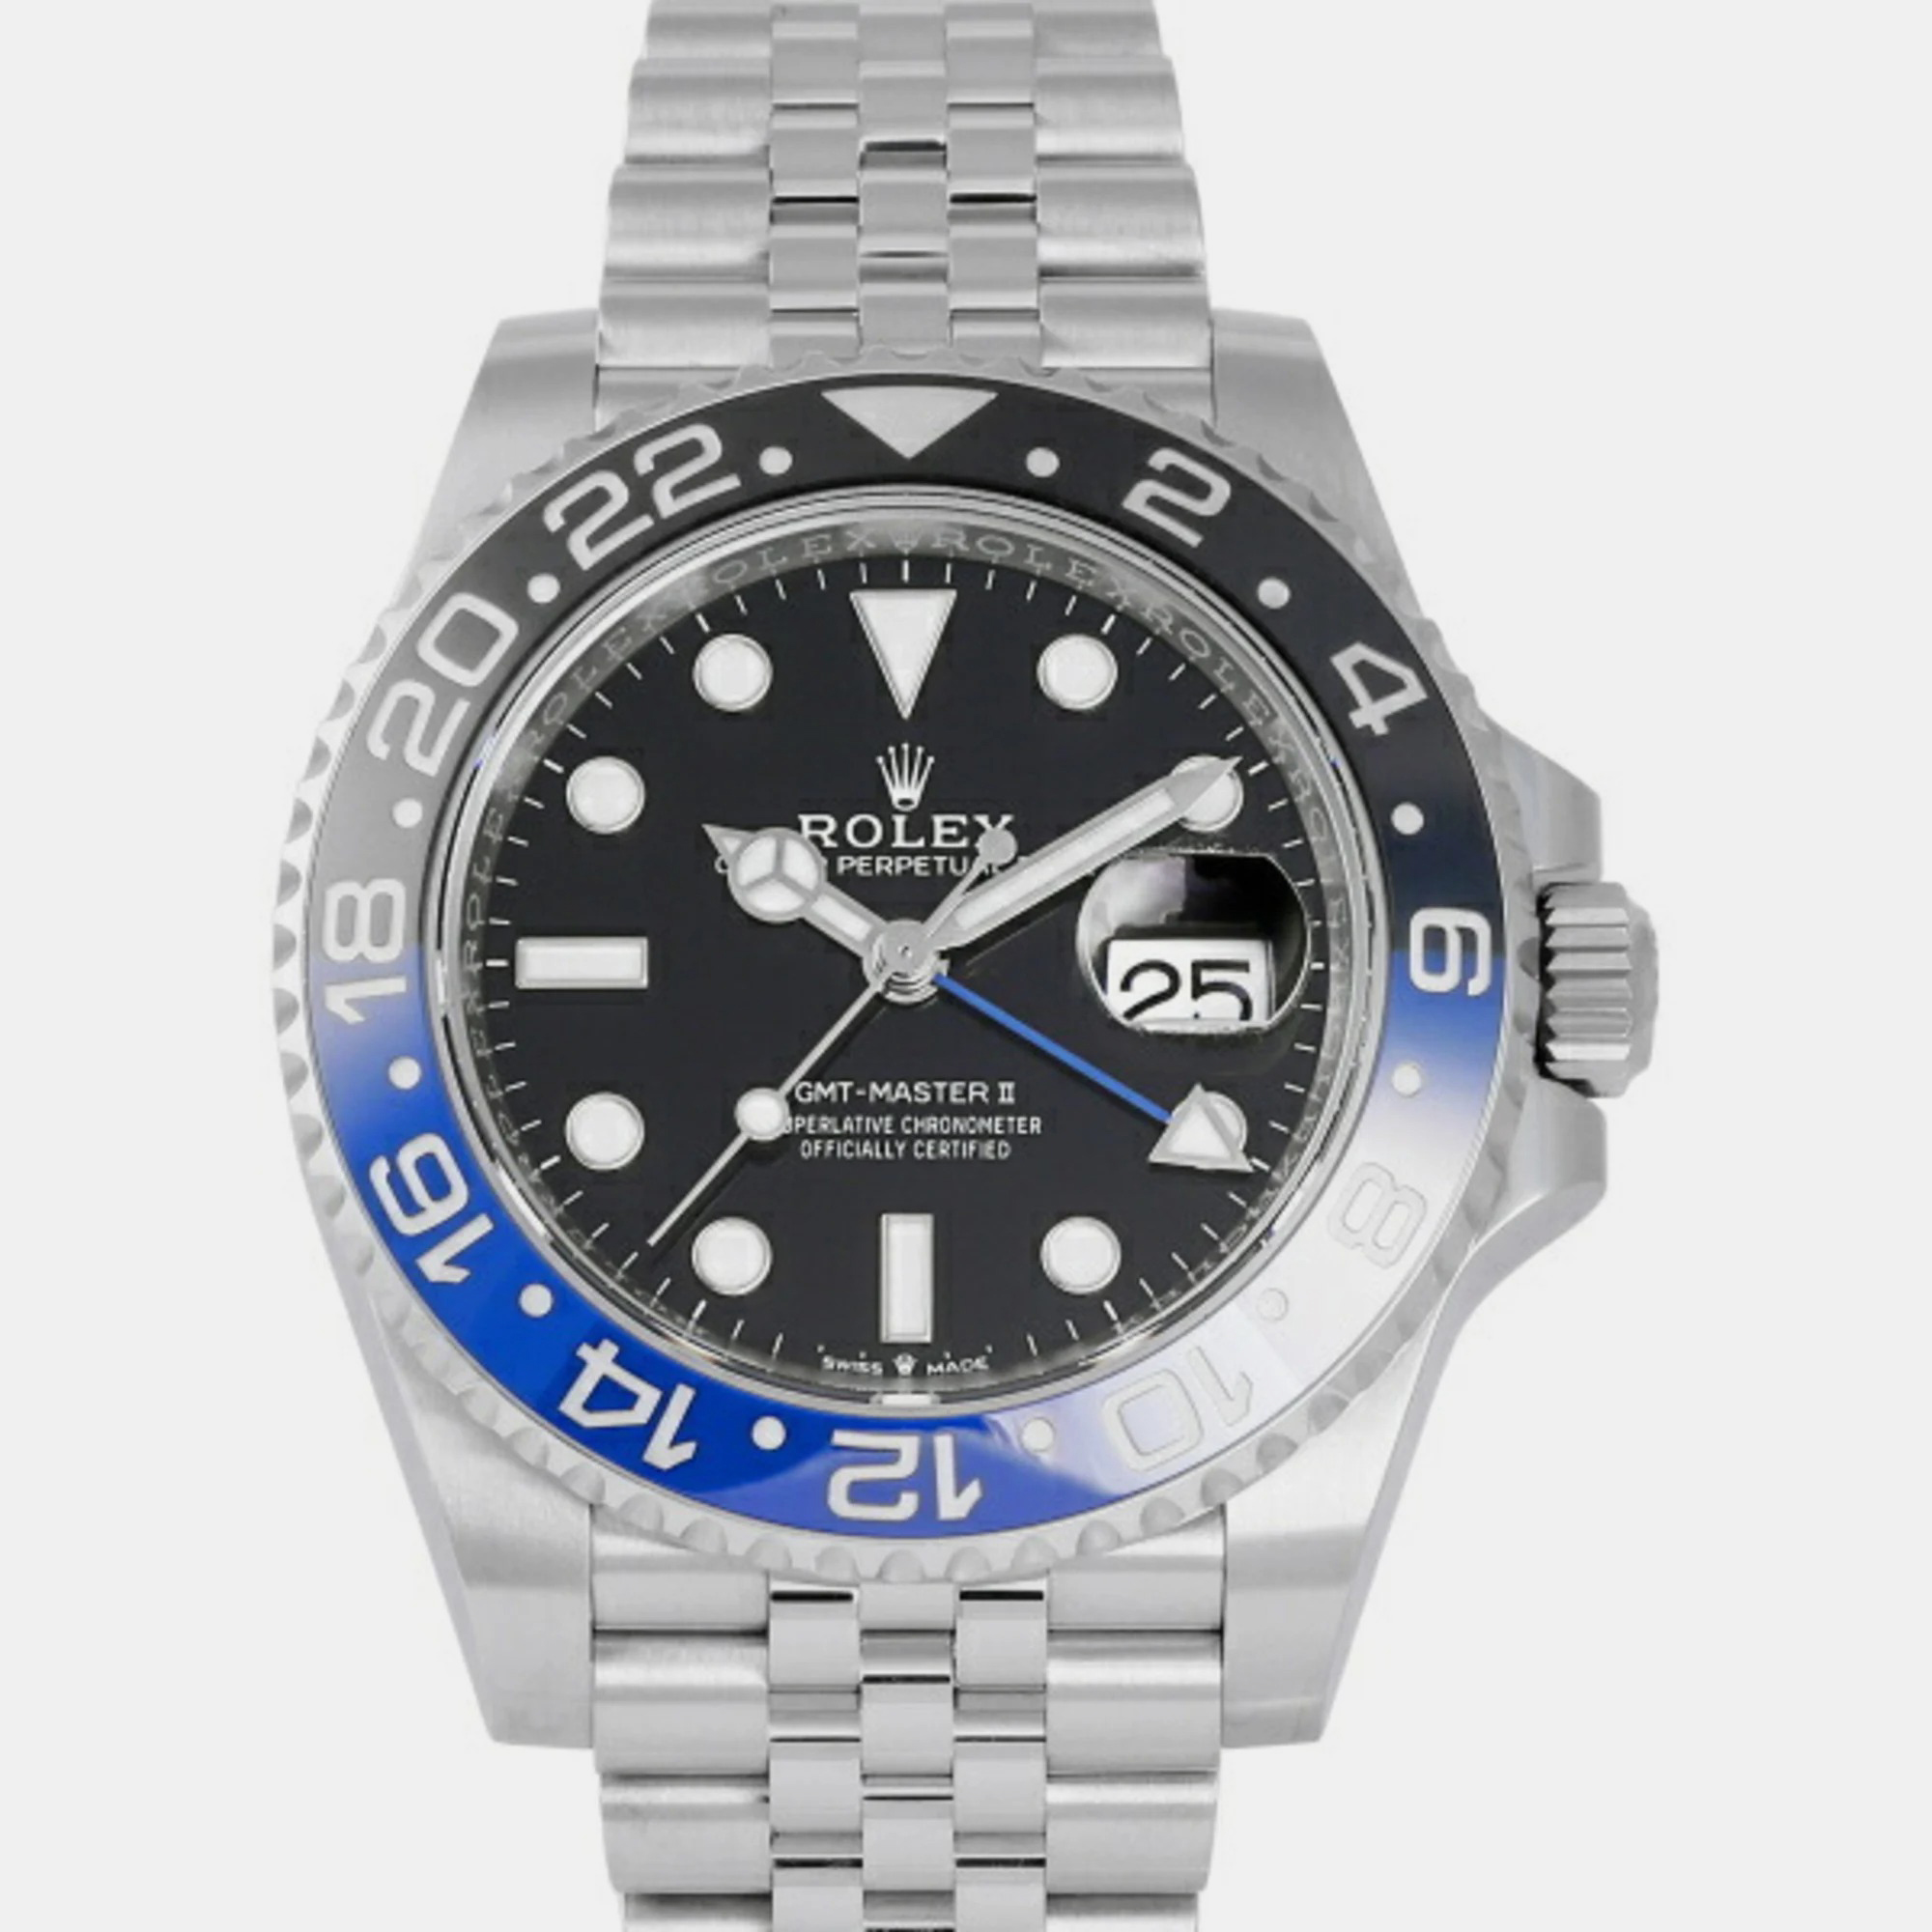 Rolex Black Stainless Steel And Ceramic GMT-Master II 126710BLNR Automatic Men's Wristwatch 40 Mm